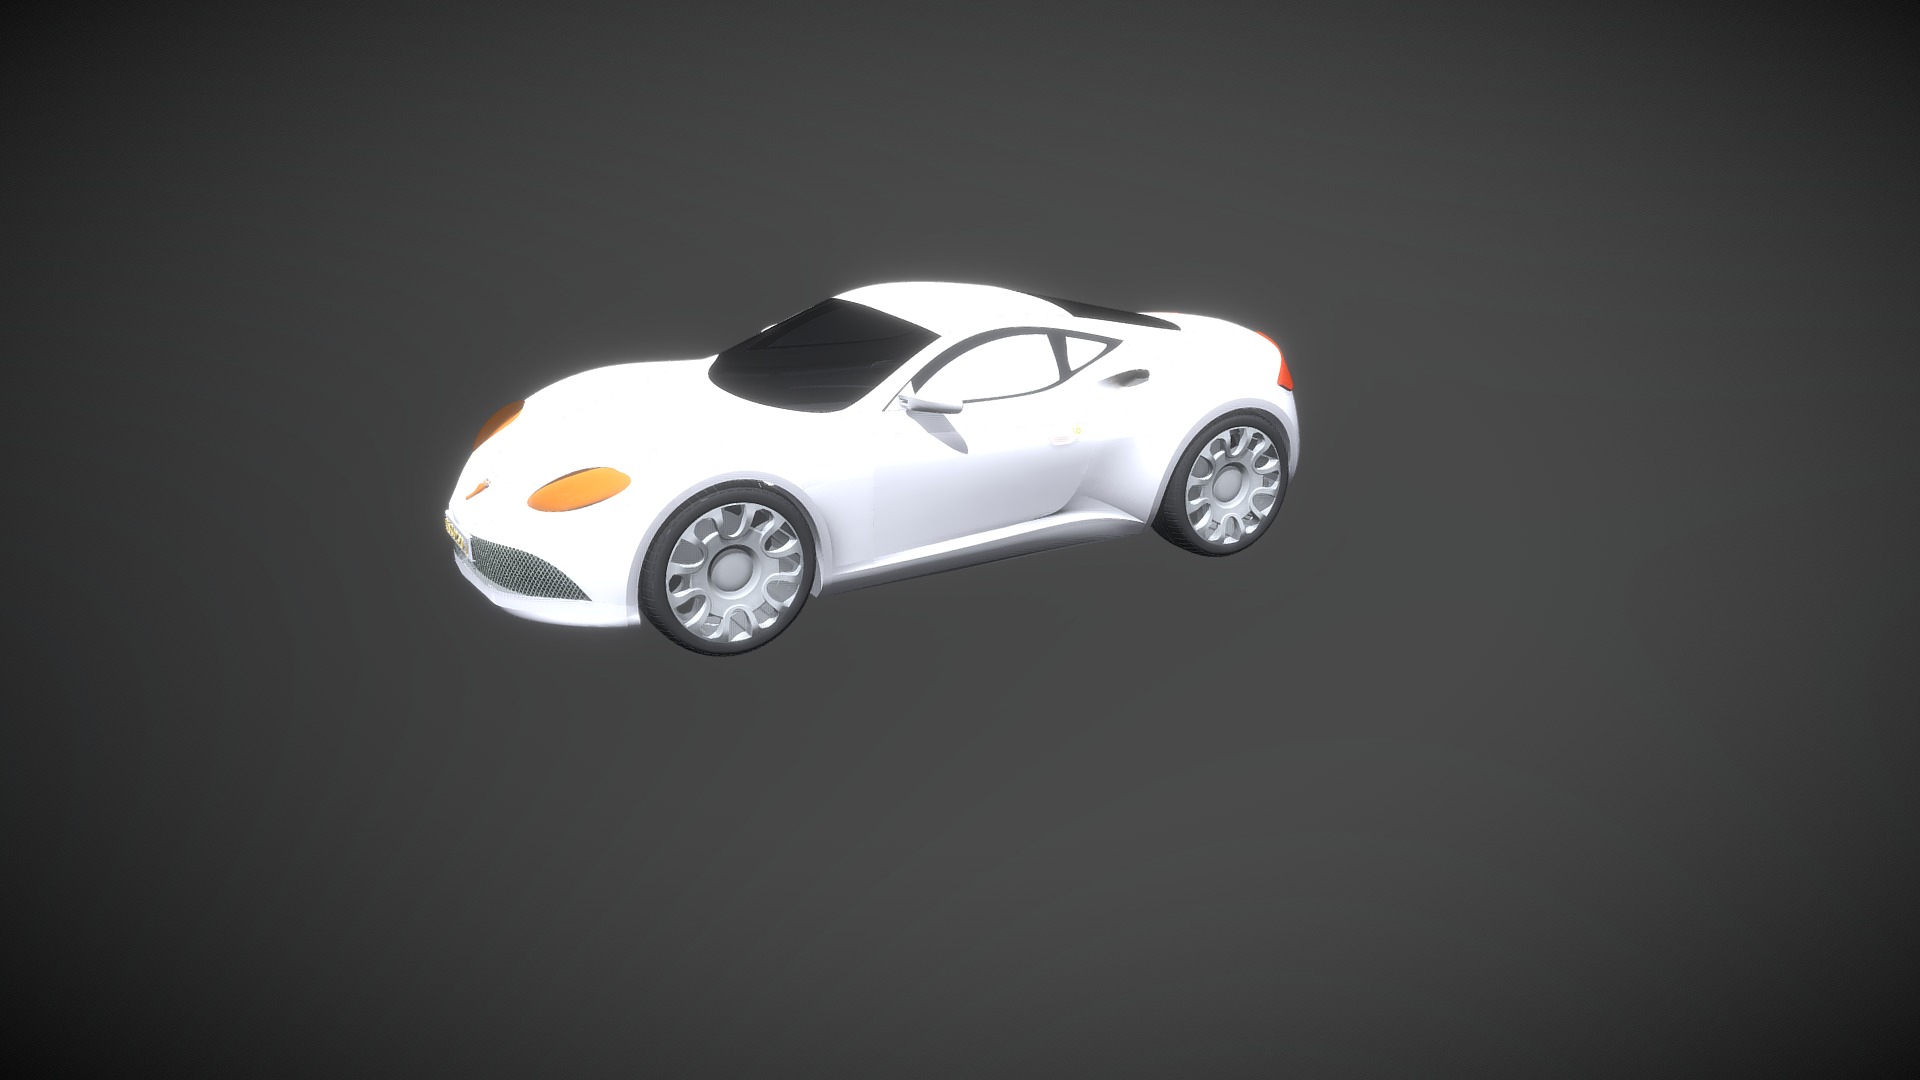 3D model Artega Sport car 3D CAD file - This is a 3D model of the Artega Sport car 3D CAD file. The 3D model is about a white car with a black background.